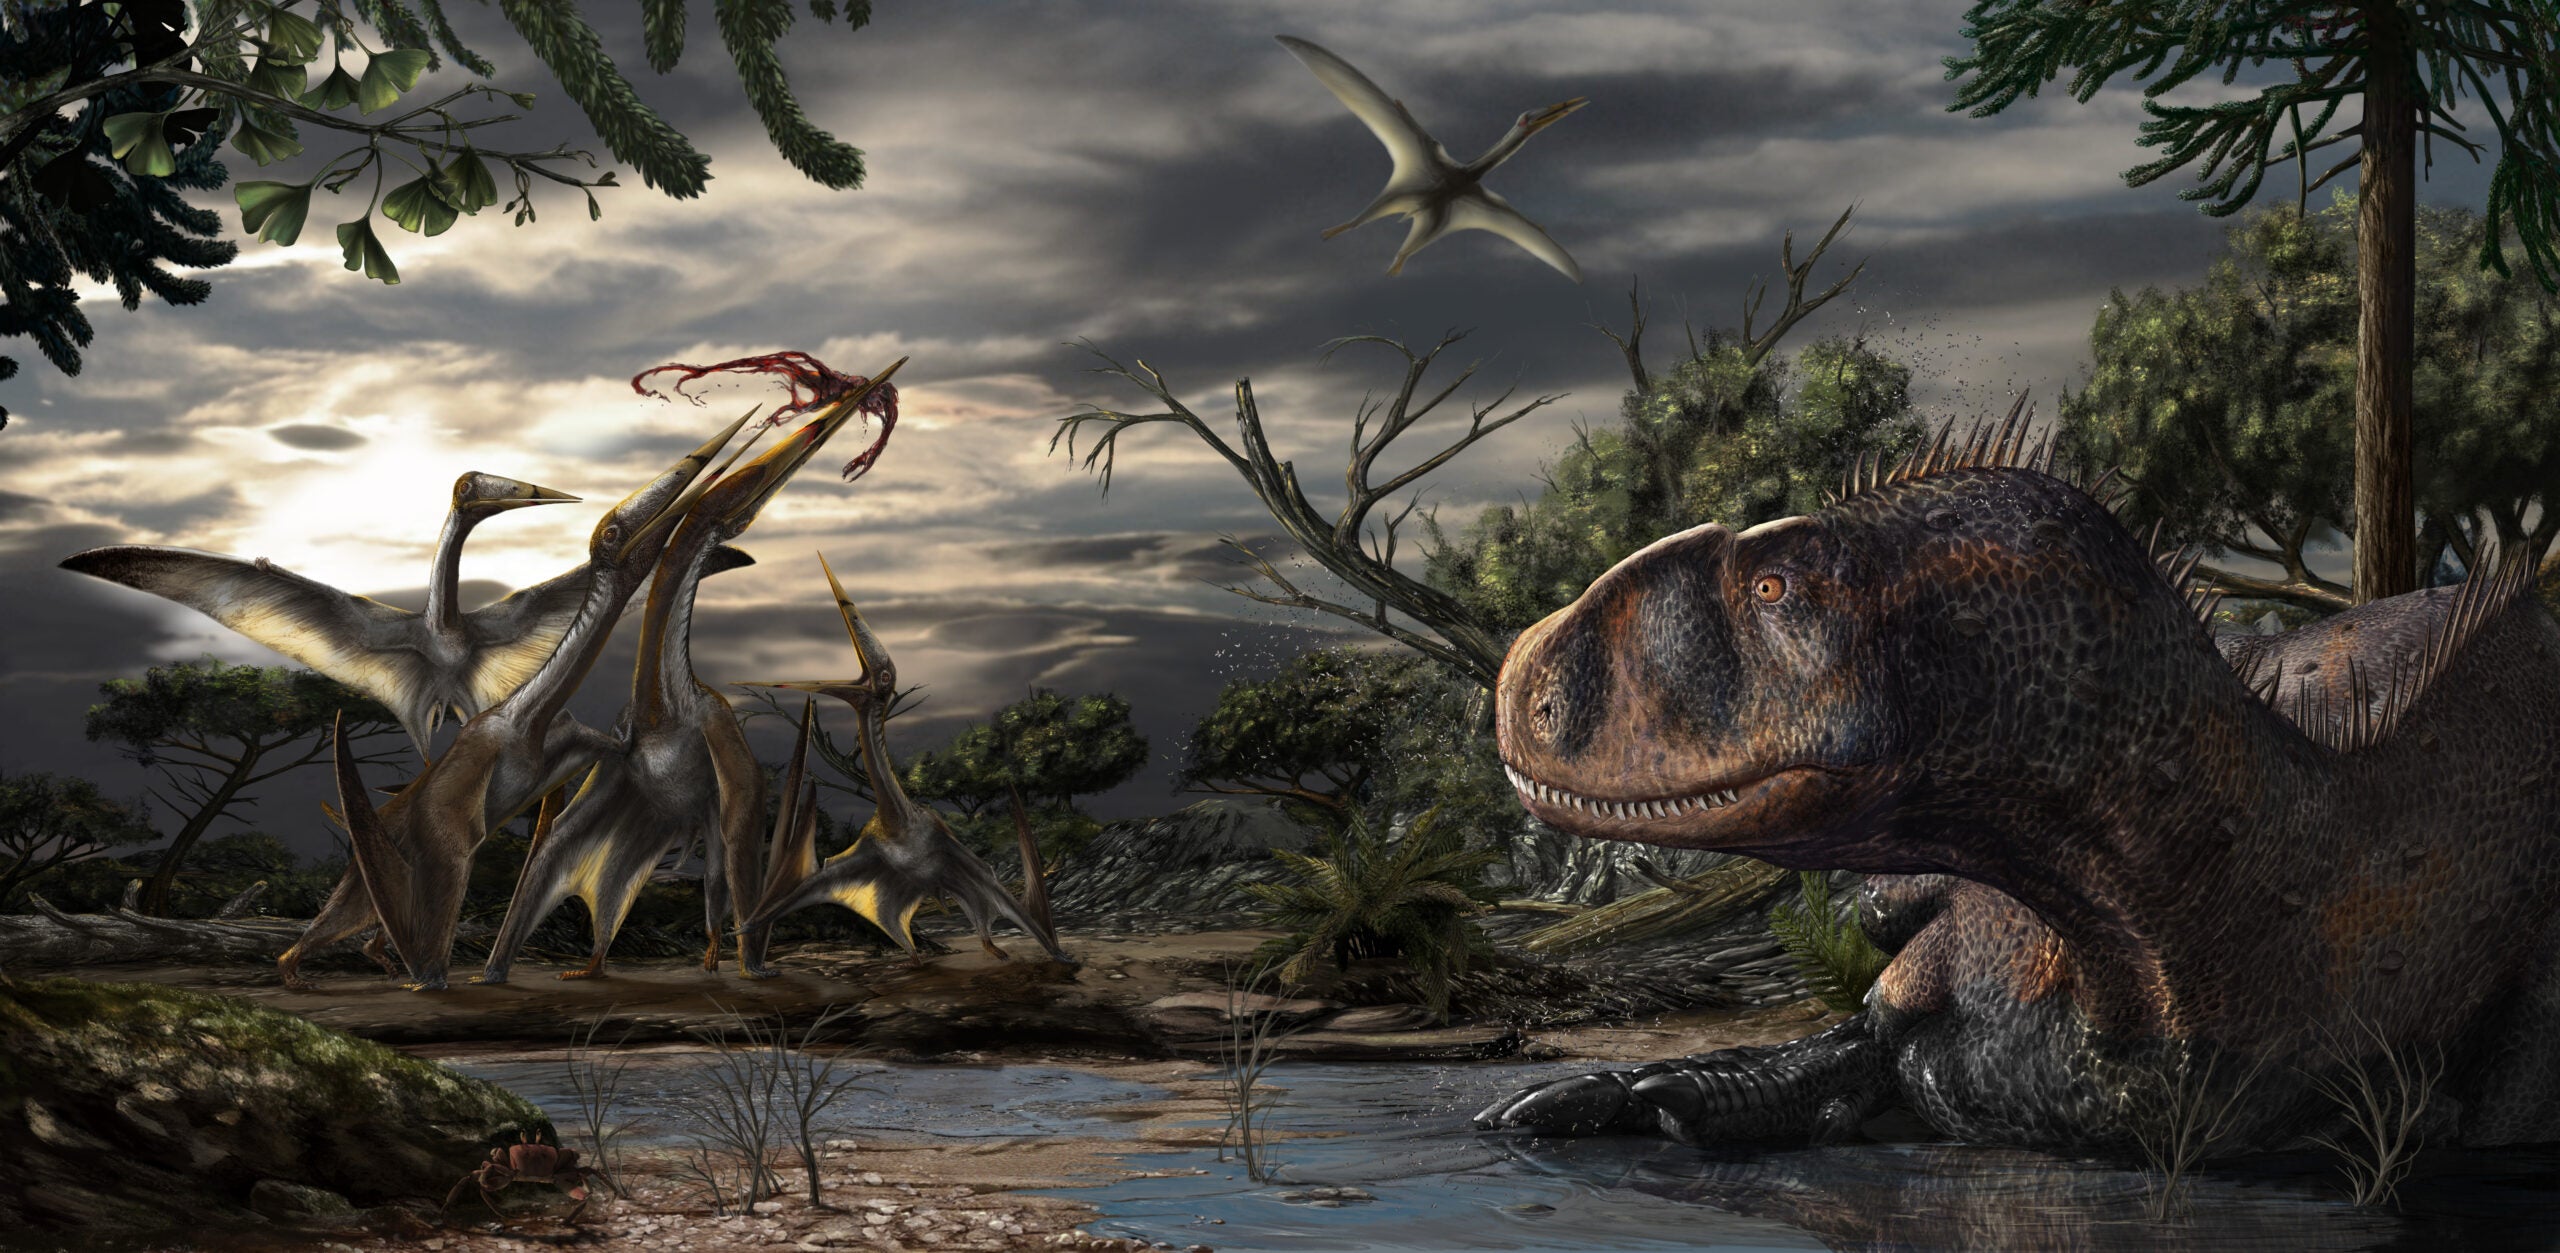 The Sahara Desert was once flooded with history's most vicious dinosaurs